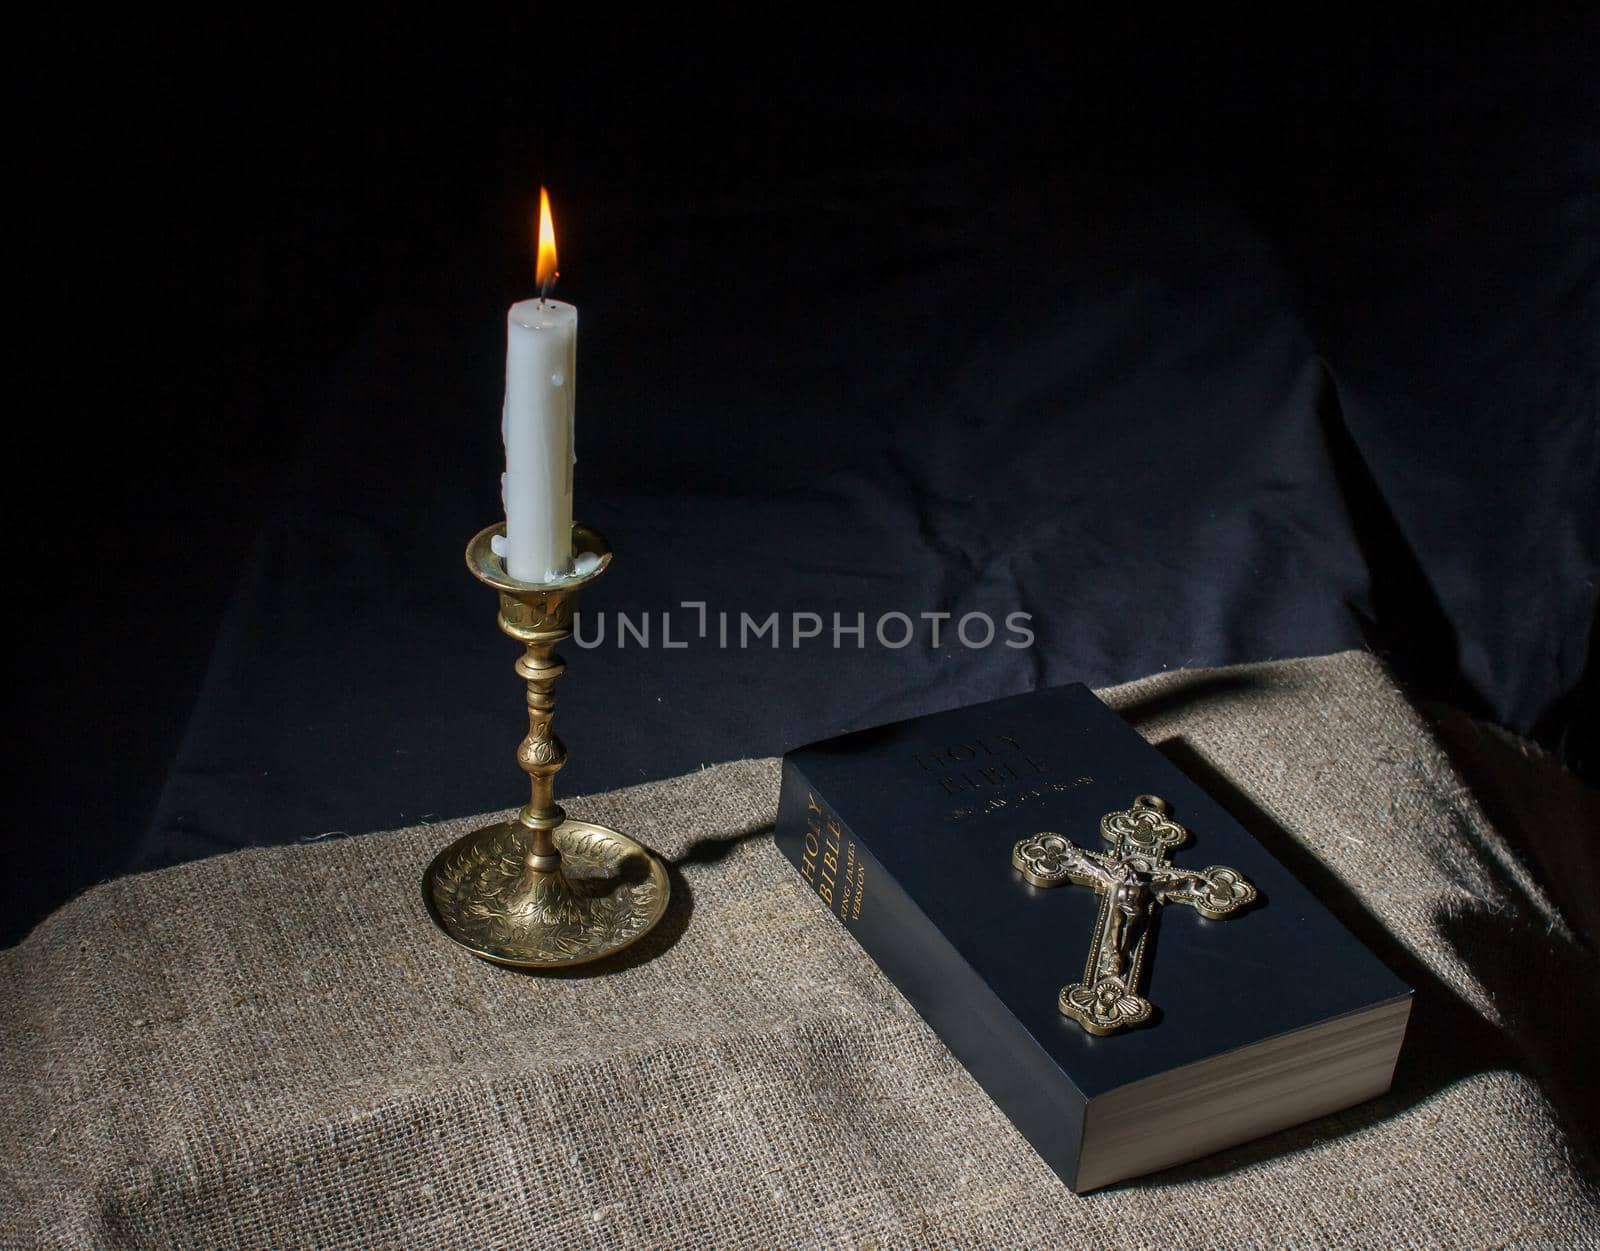 bronze cross, burning candle and bible on the table by raddnatt